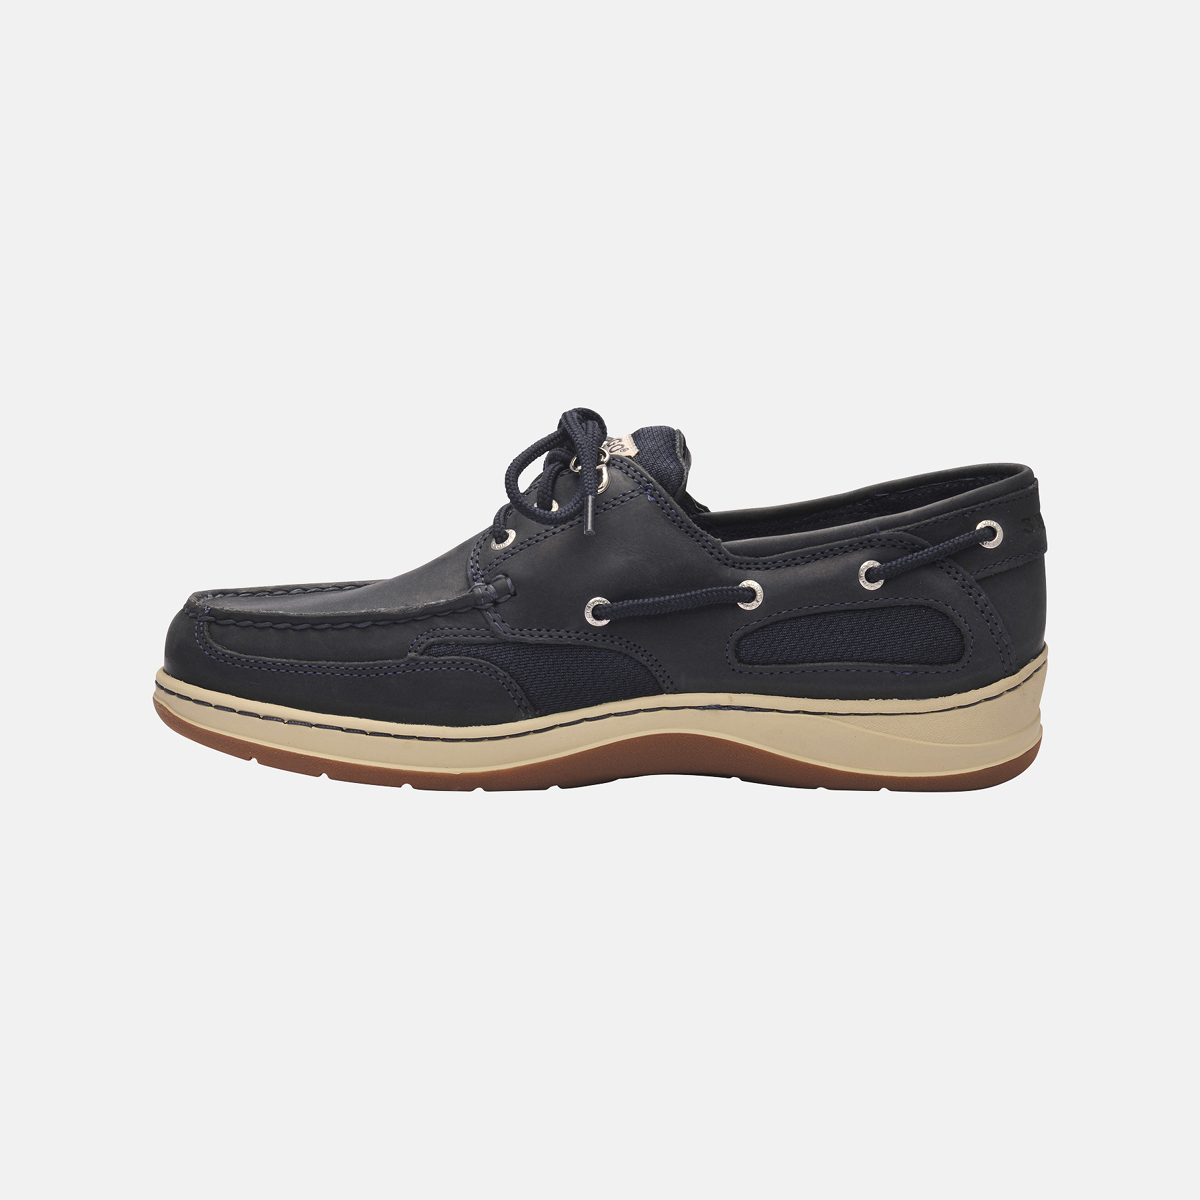 Sebago Clovehitch II chaussures bateau homme blue navy leather, taille 43,5 (US 9.5)